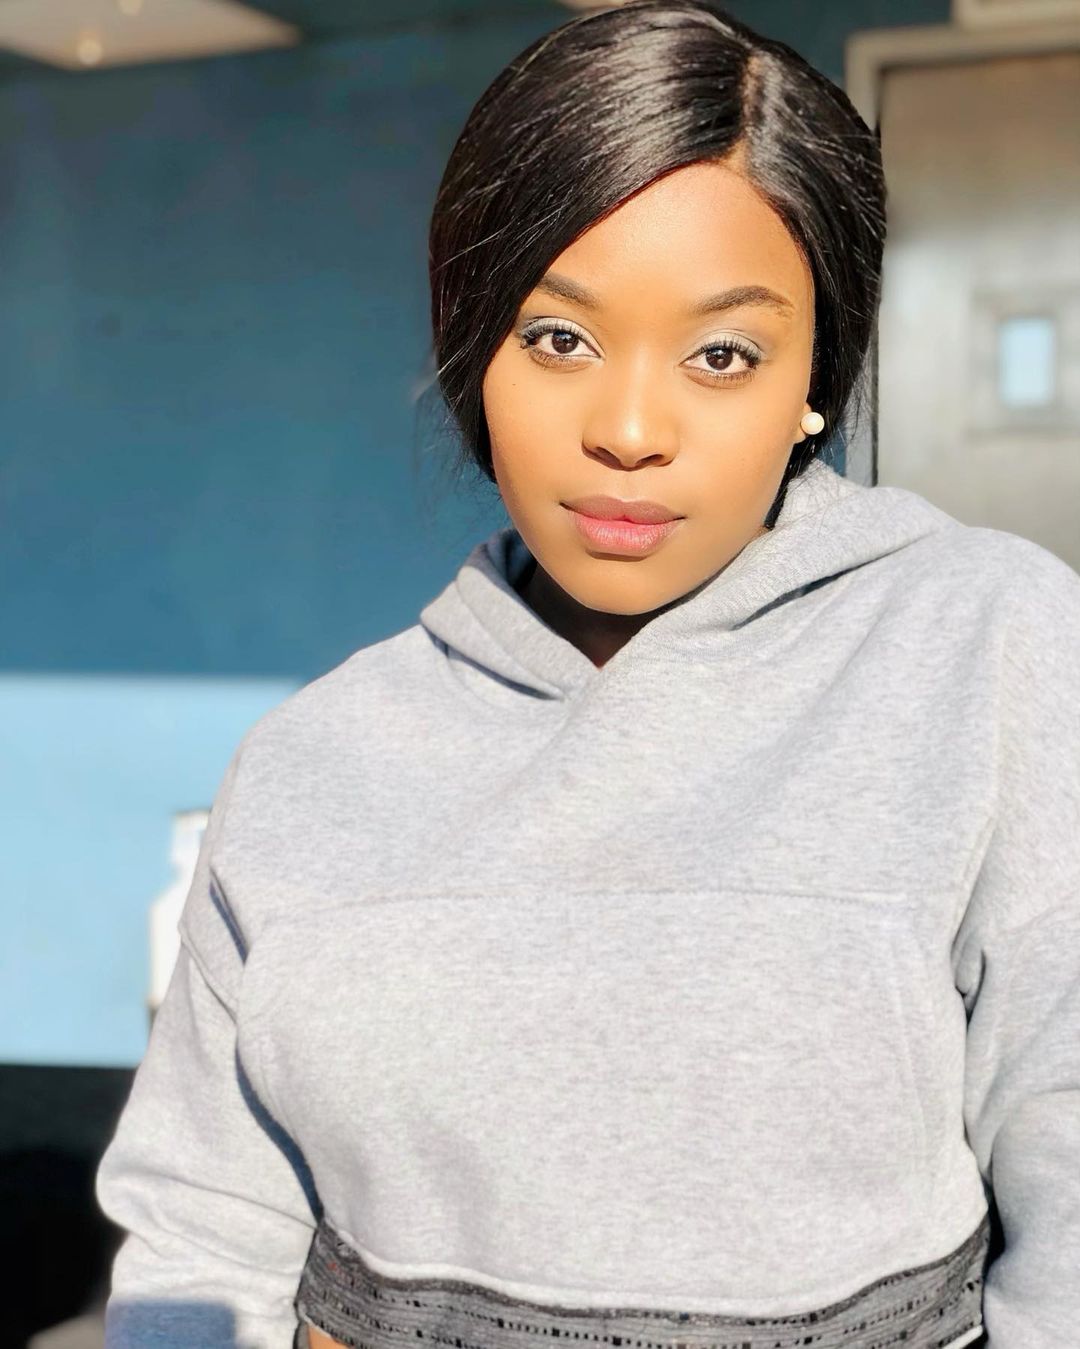 Actress Sivenathi Mabuya to star in e.TV’s new series ‘Housewives’